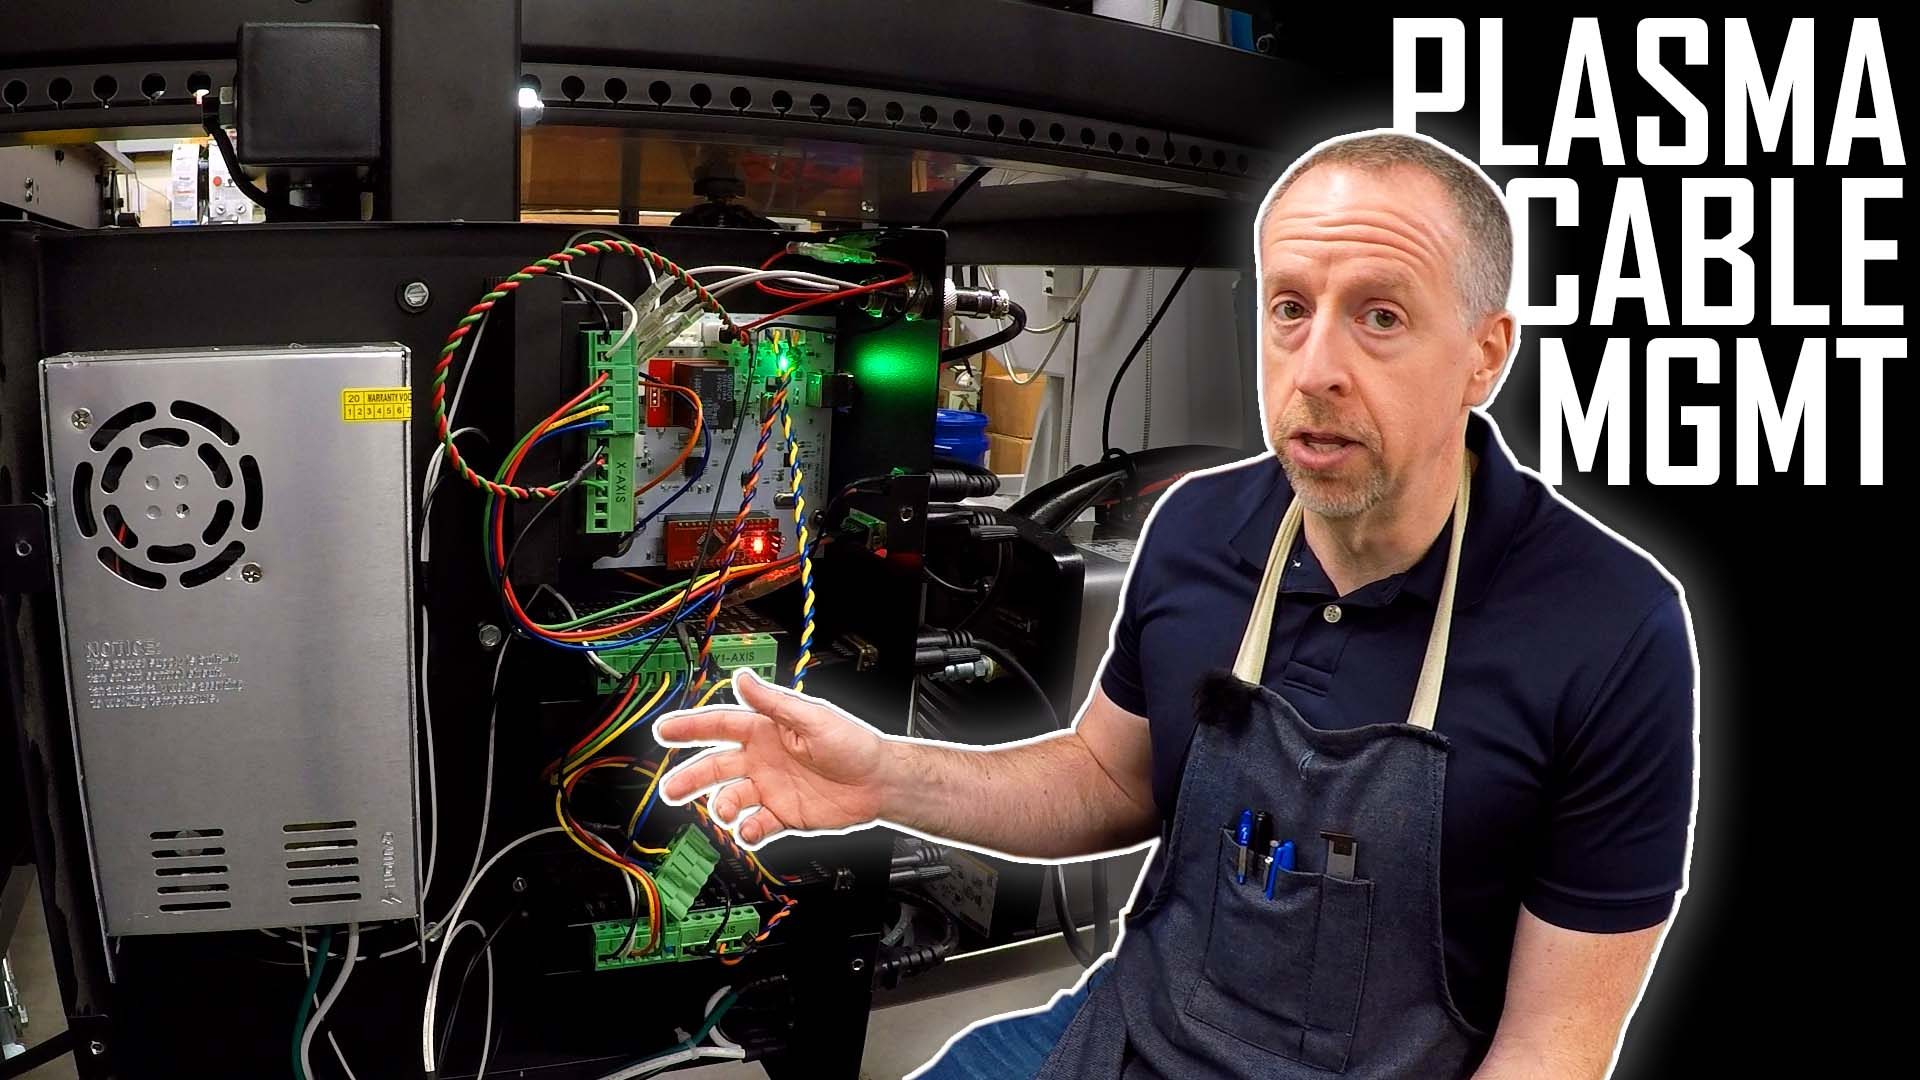 Crossfire Plasma Table Cable Management | Reversing the Axes